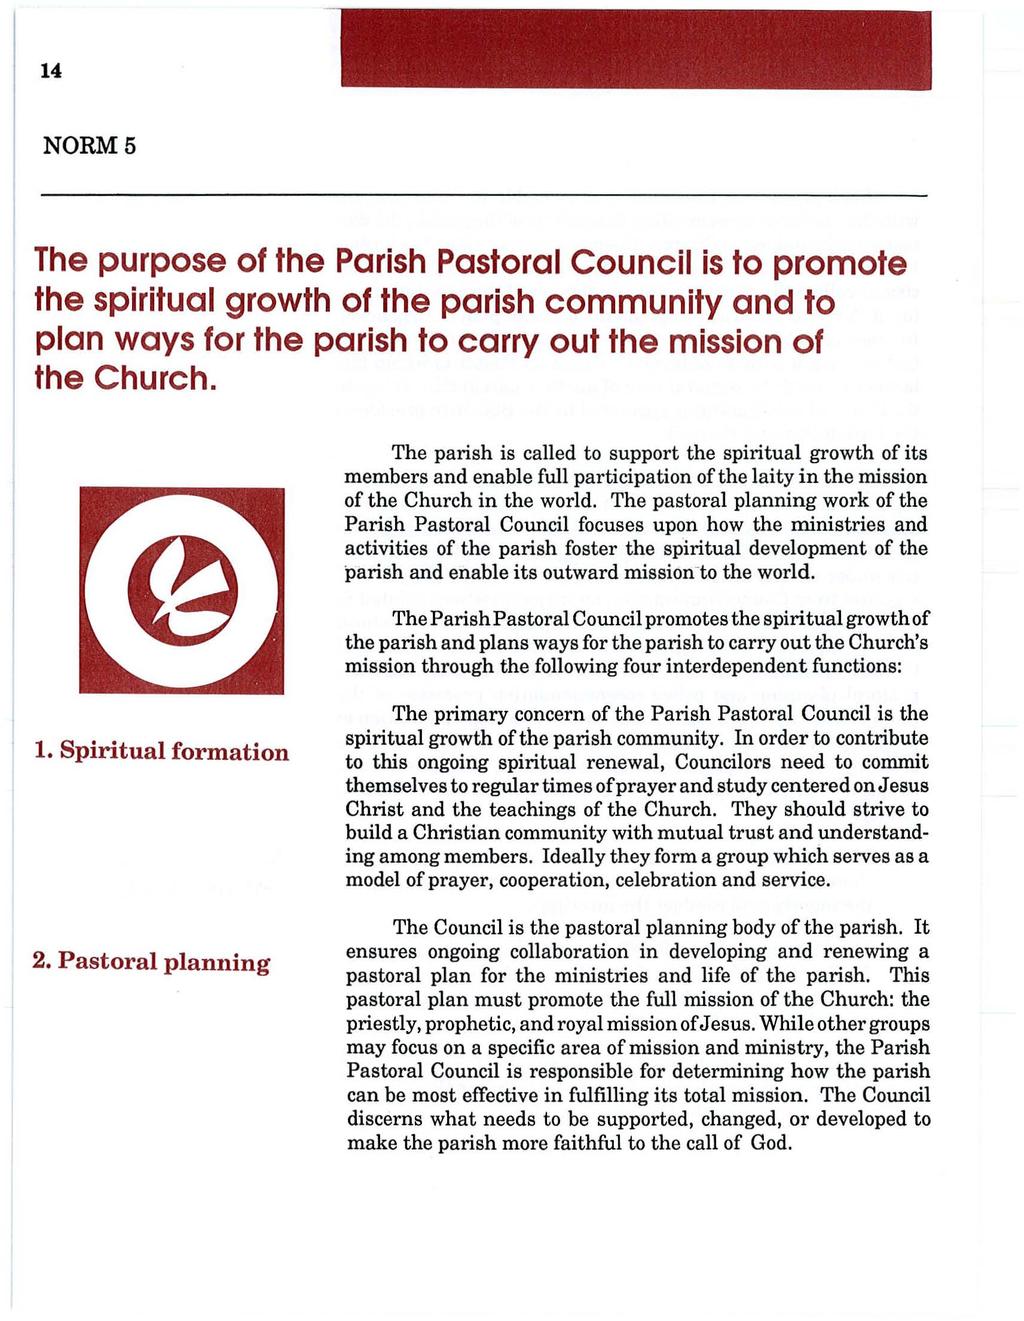 14 NORM 5 The purpose of the Parish Pastoral Council is to promote the spiritual growth of the parish community and to plan ways for the parish to carry out the mission of the Church.